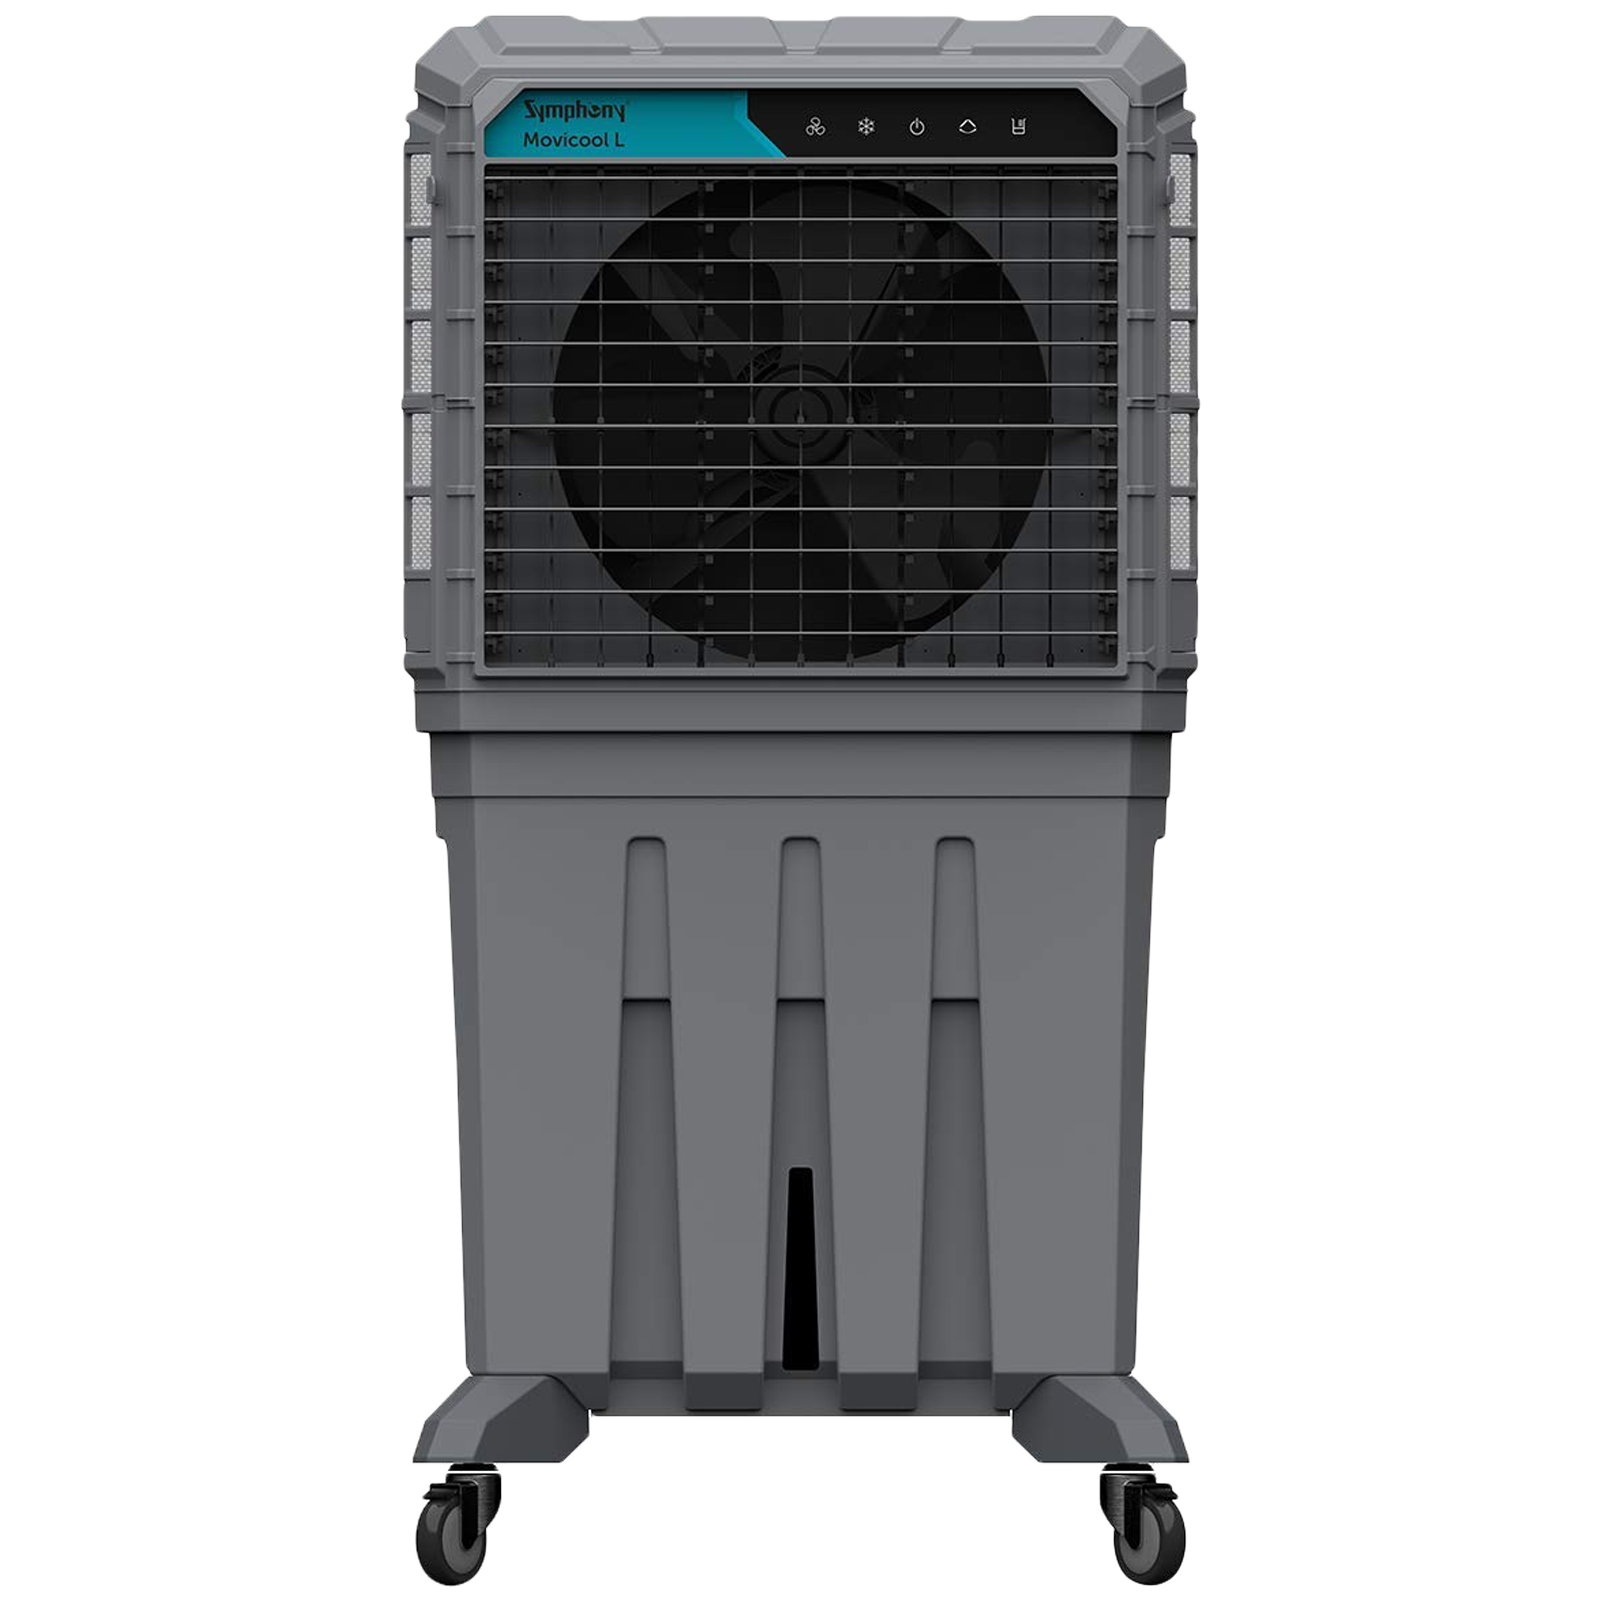 Symphony Movicool L 200i 200 Litres Commercial Air Cooler with Multi-Function Remote (Digital Touchscreen, Grey)